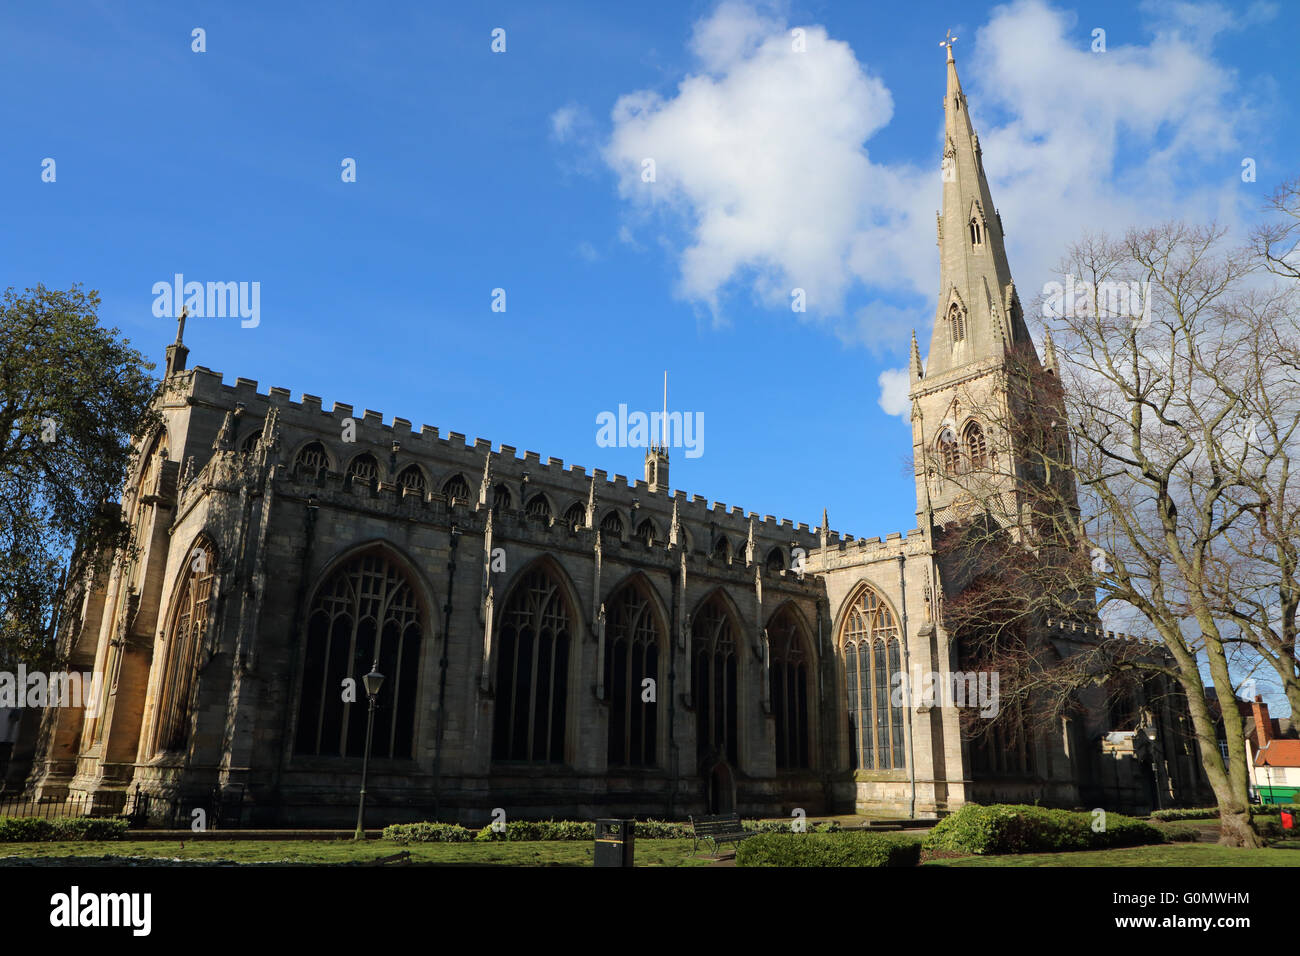 Church of St Mary Magadalene Newark-on-Trent with one of the tallest towers in England under blue skies Stock Photo